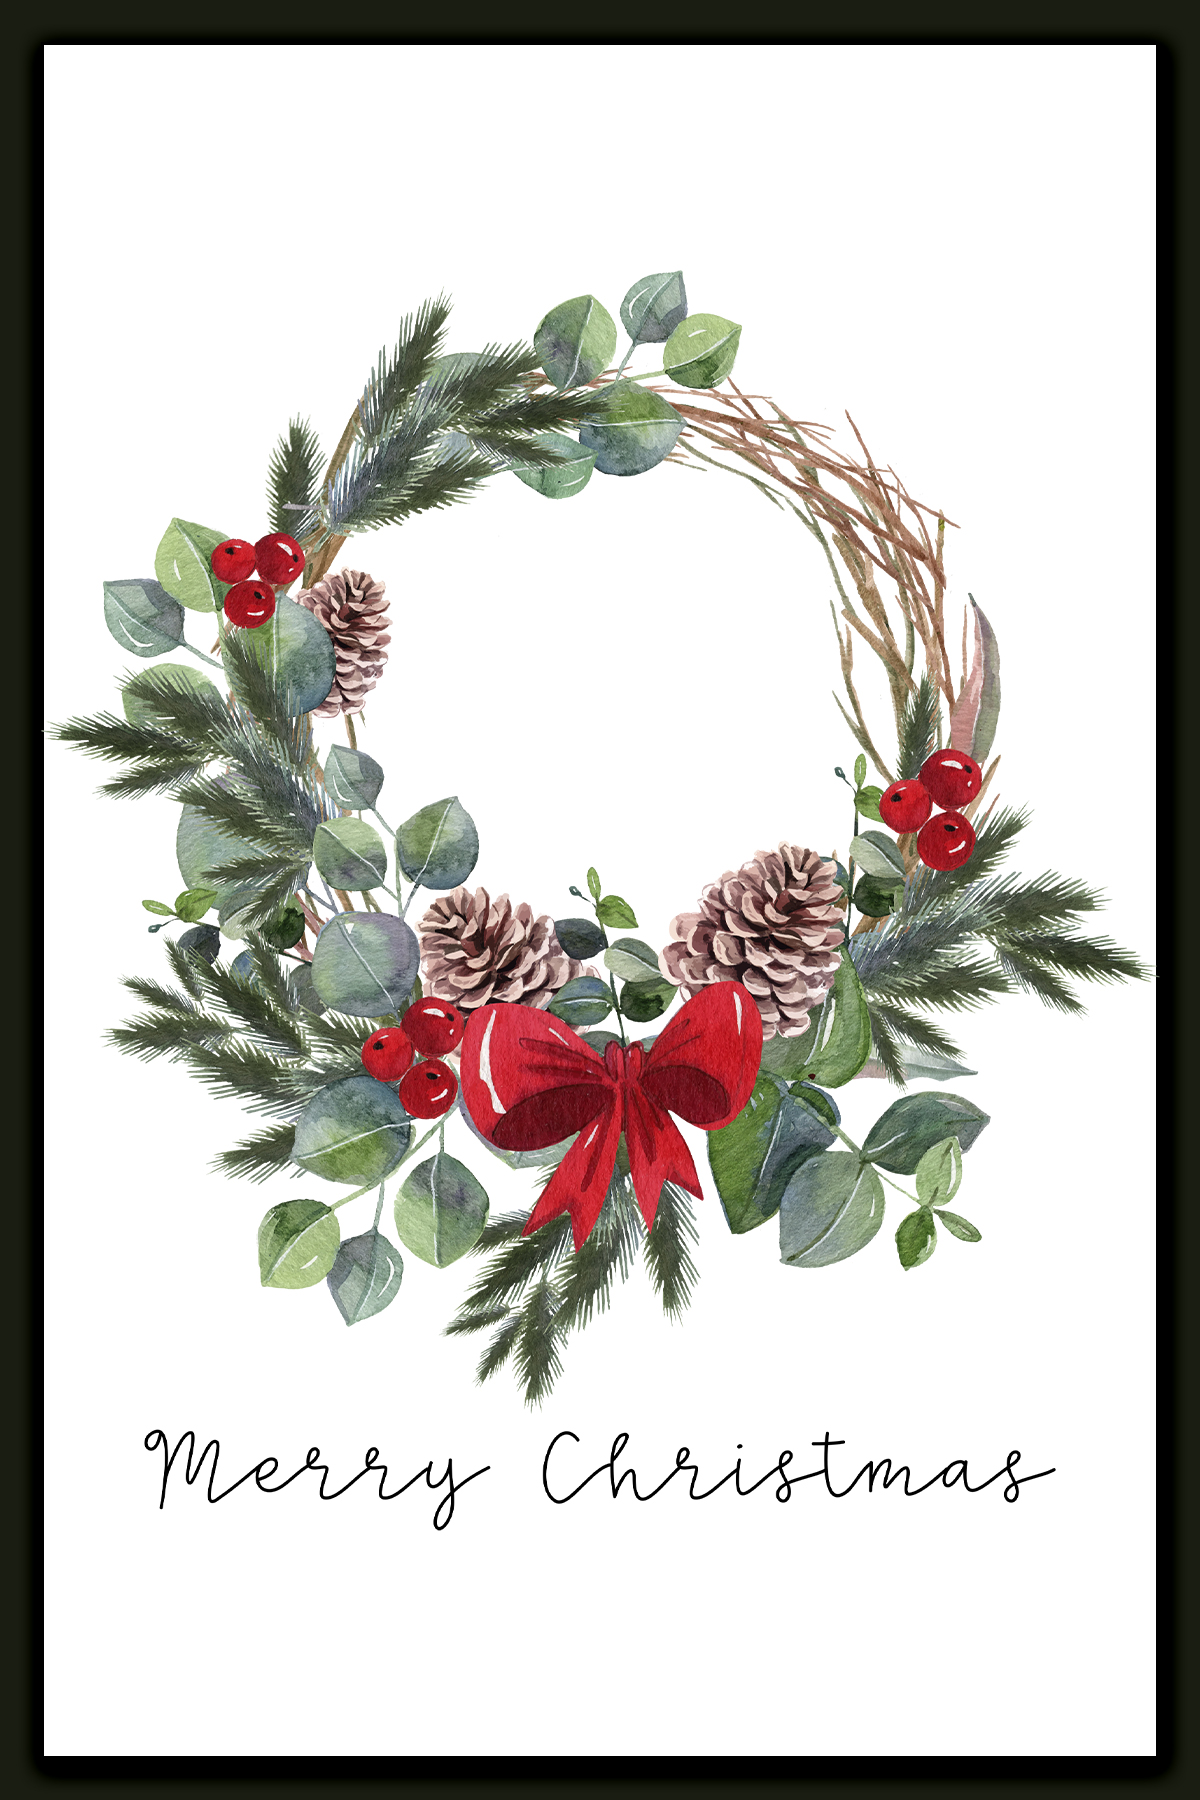 This image shows one of the designs you can get in this free Merry Christmas printable set of cards and prints. It says Merry Christmas on it and has a picture of a Christmas wreath.